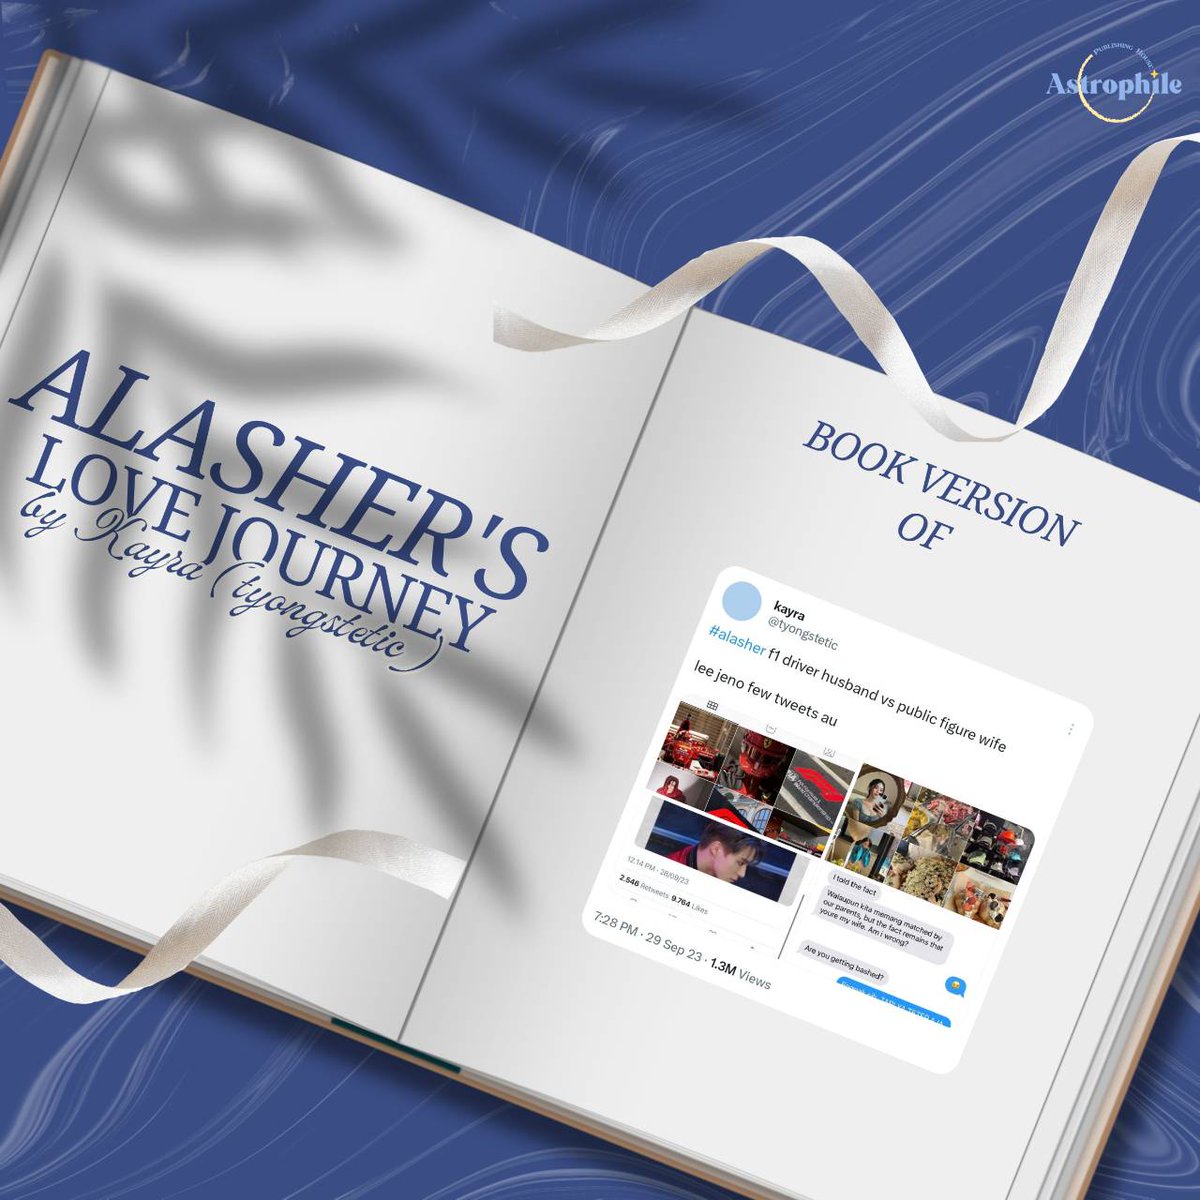 ☆ ALASHER'S LOVE JOURNEY by @tyongstetic